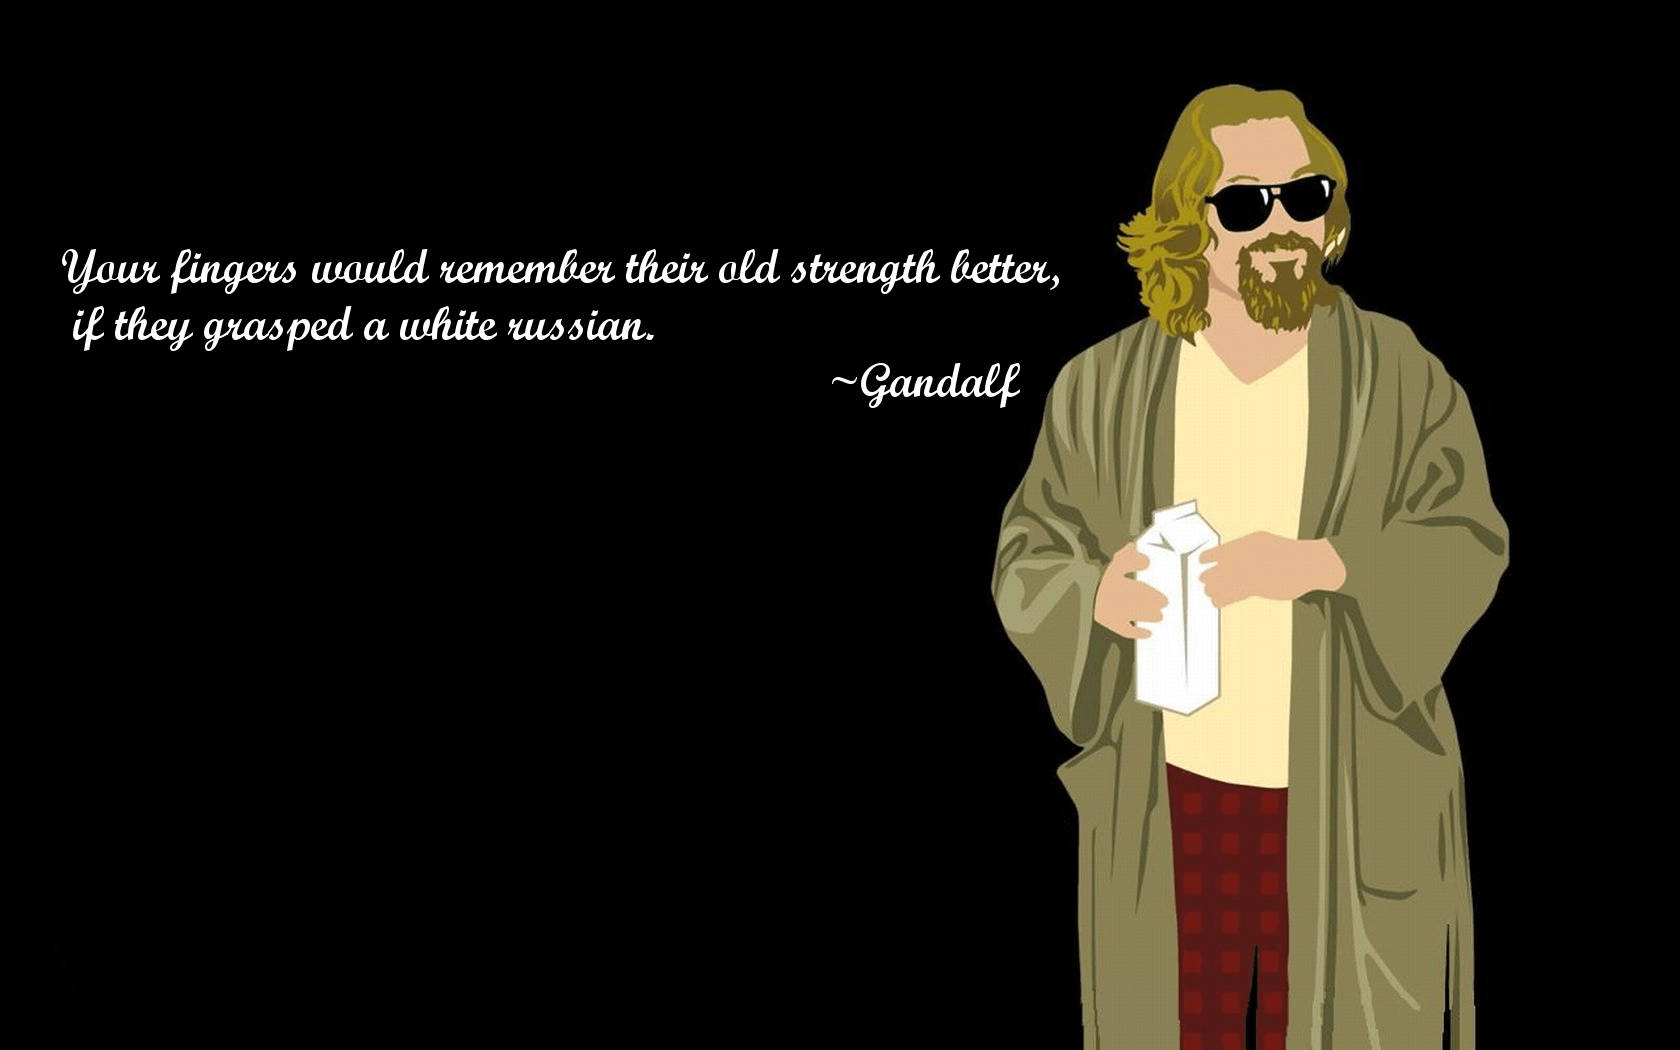 The Big Lebowski The Dude Gandalf Quote Art Background